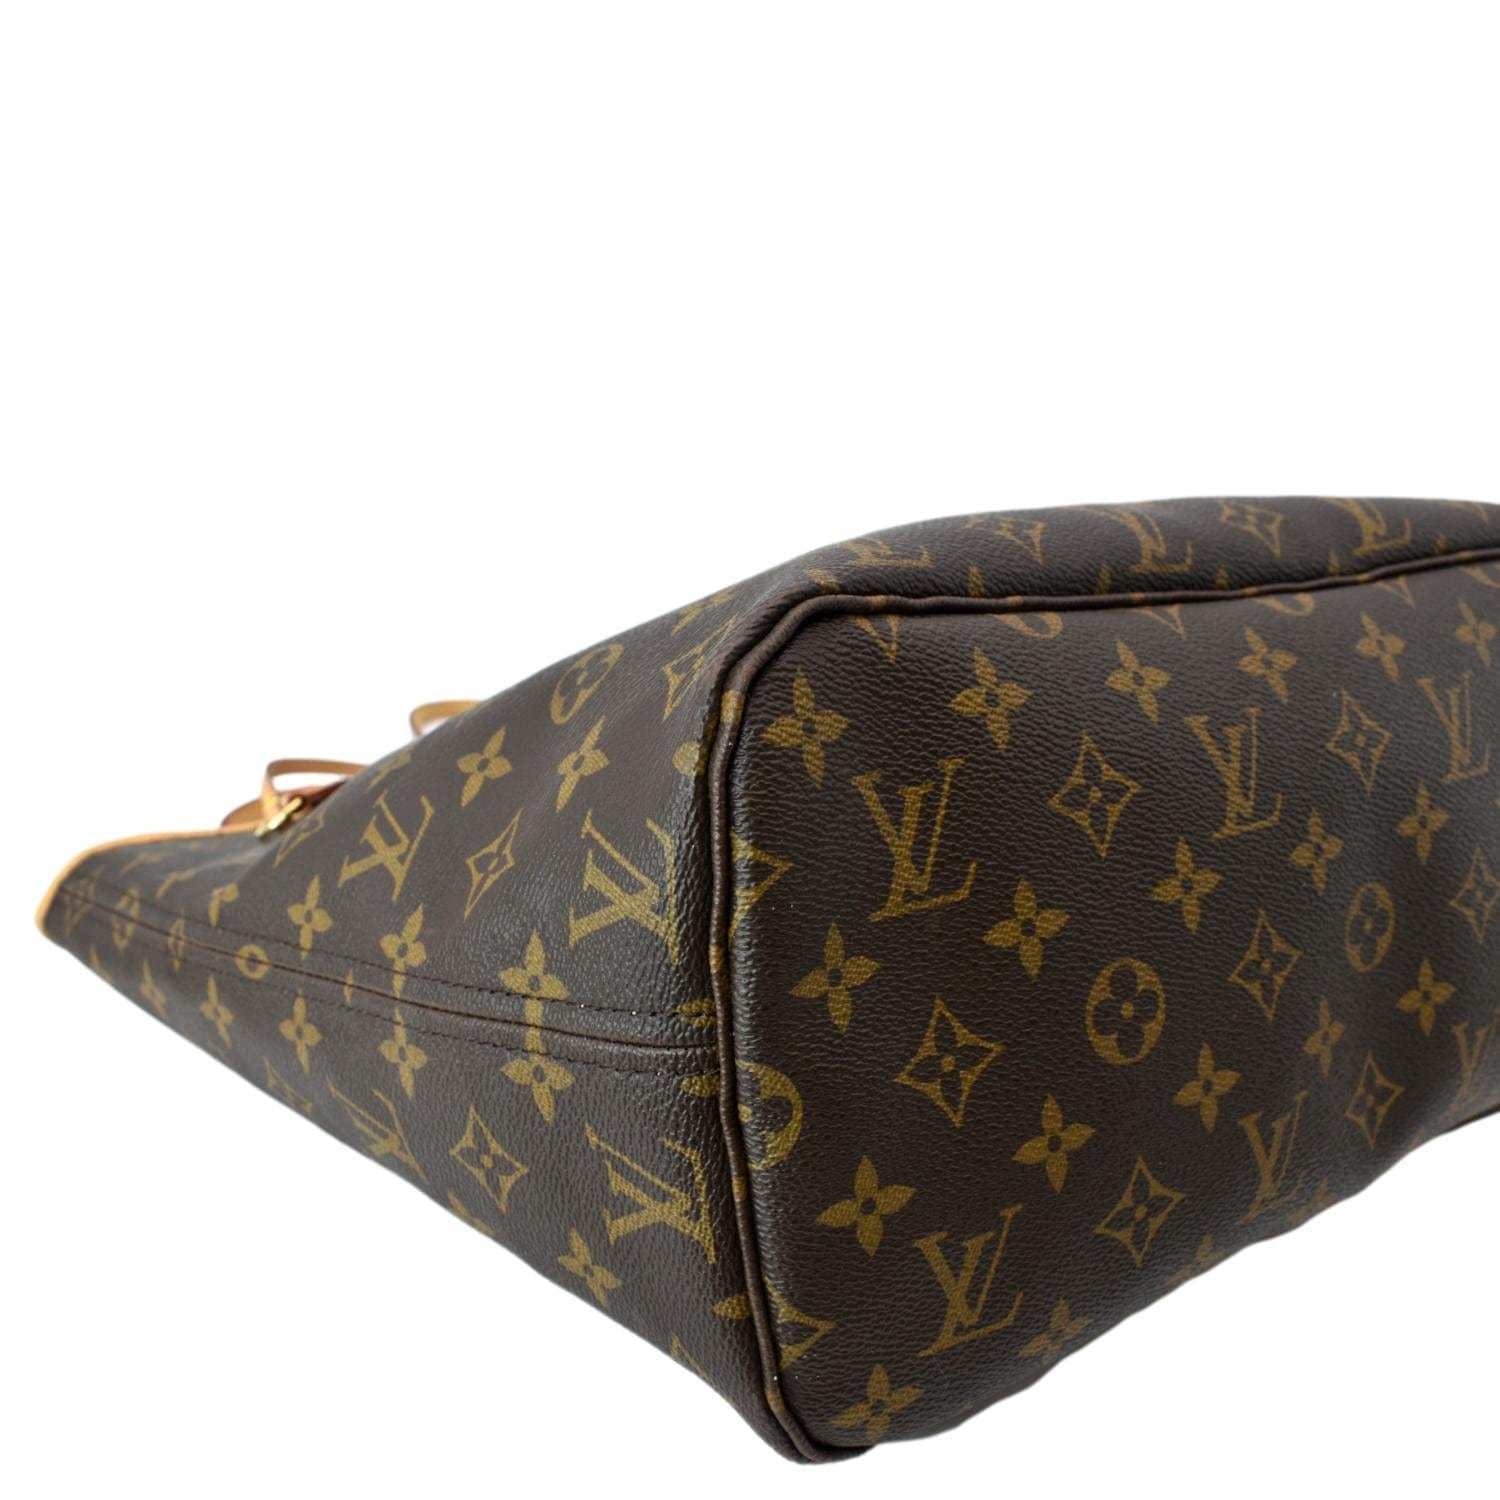 Authenticated Used Louis Vuitton Monogram Neverfull MM M4 